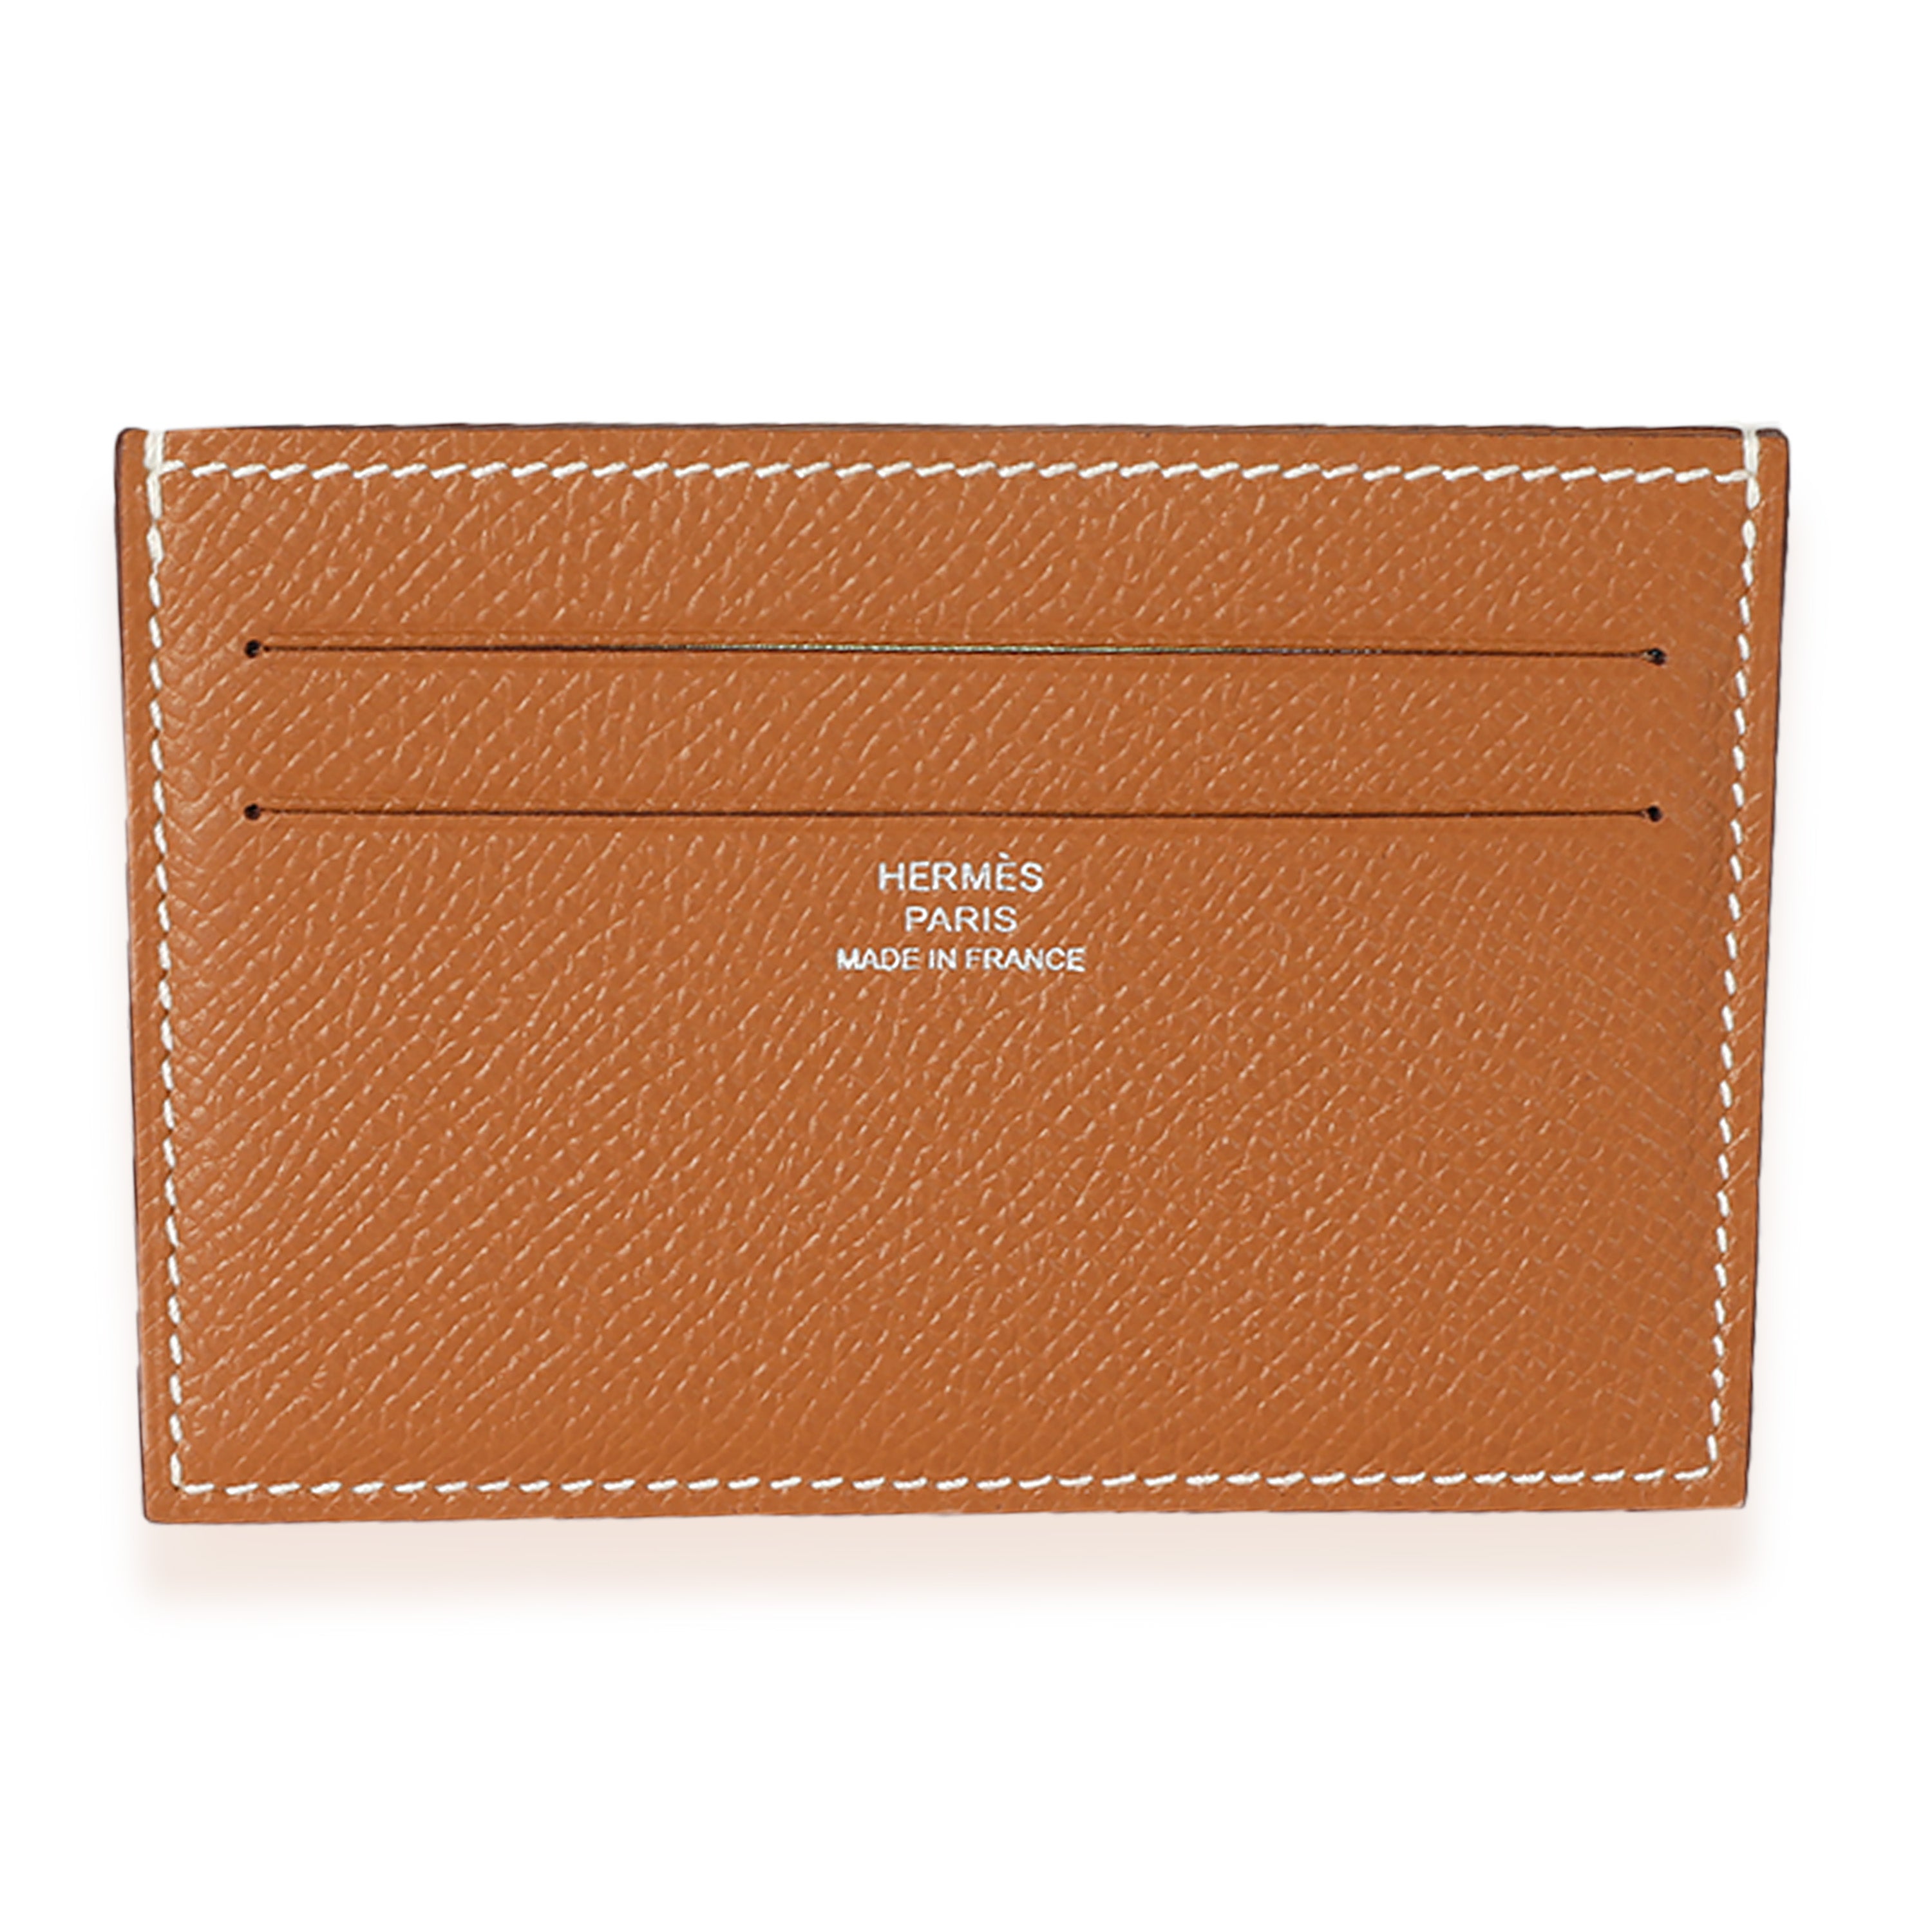 Hermès Citizen Twill Card Holder Garden of Harnesses Gris Meyer Epsom –  Coco Approved Studio